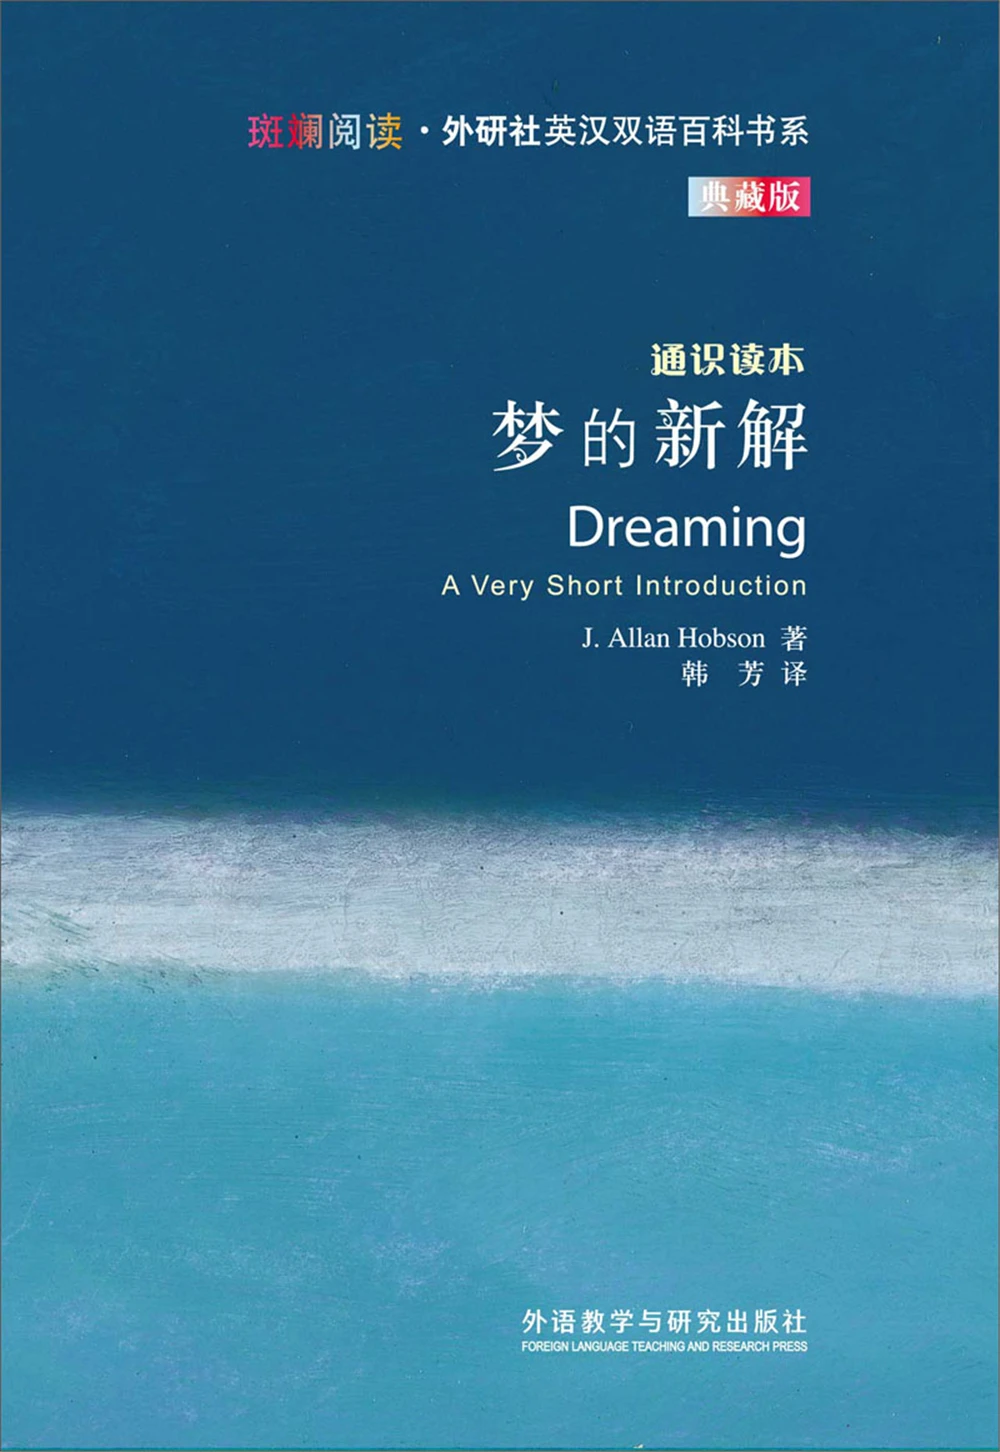 

School & Educational English book (Tongshu Reader Collector's Edition) [Dreaming A Very Short Introduction]